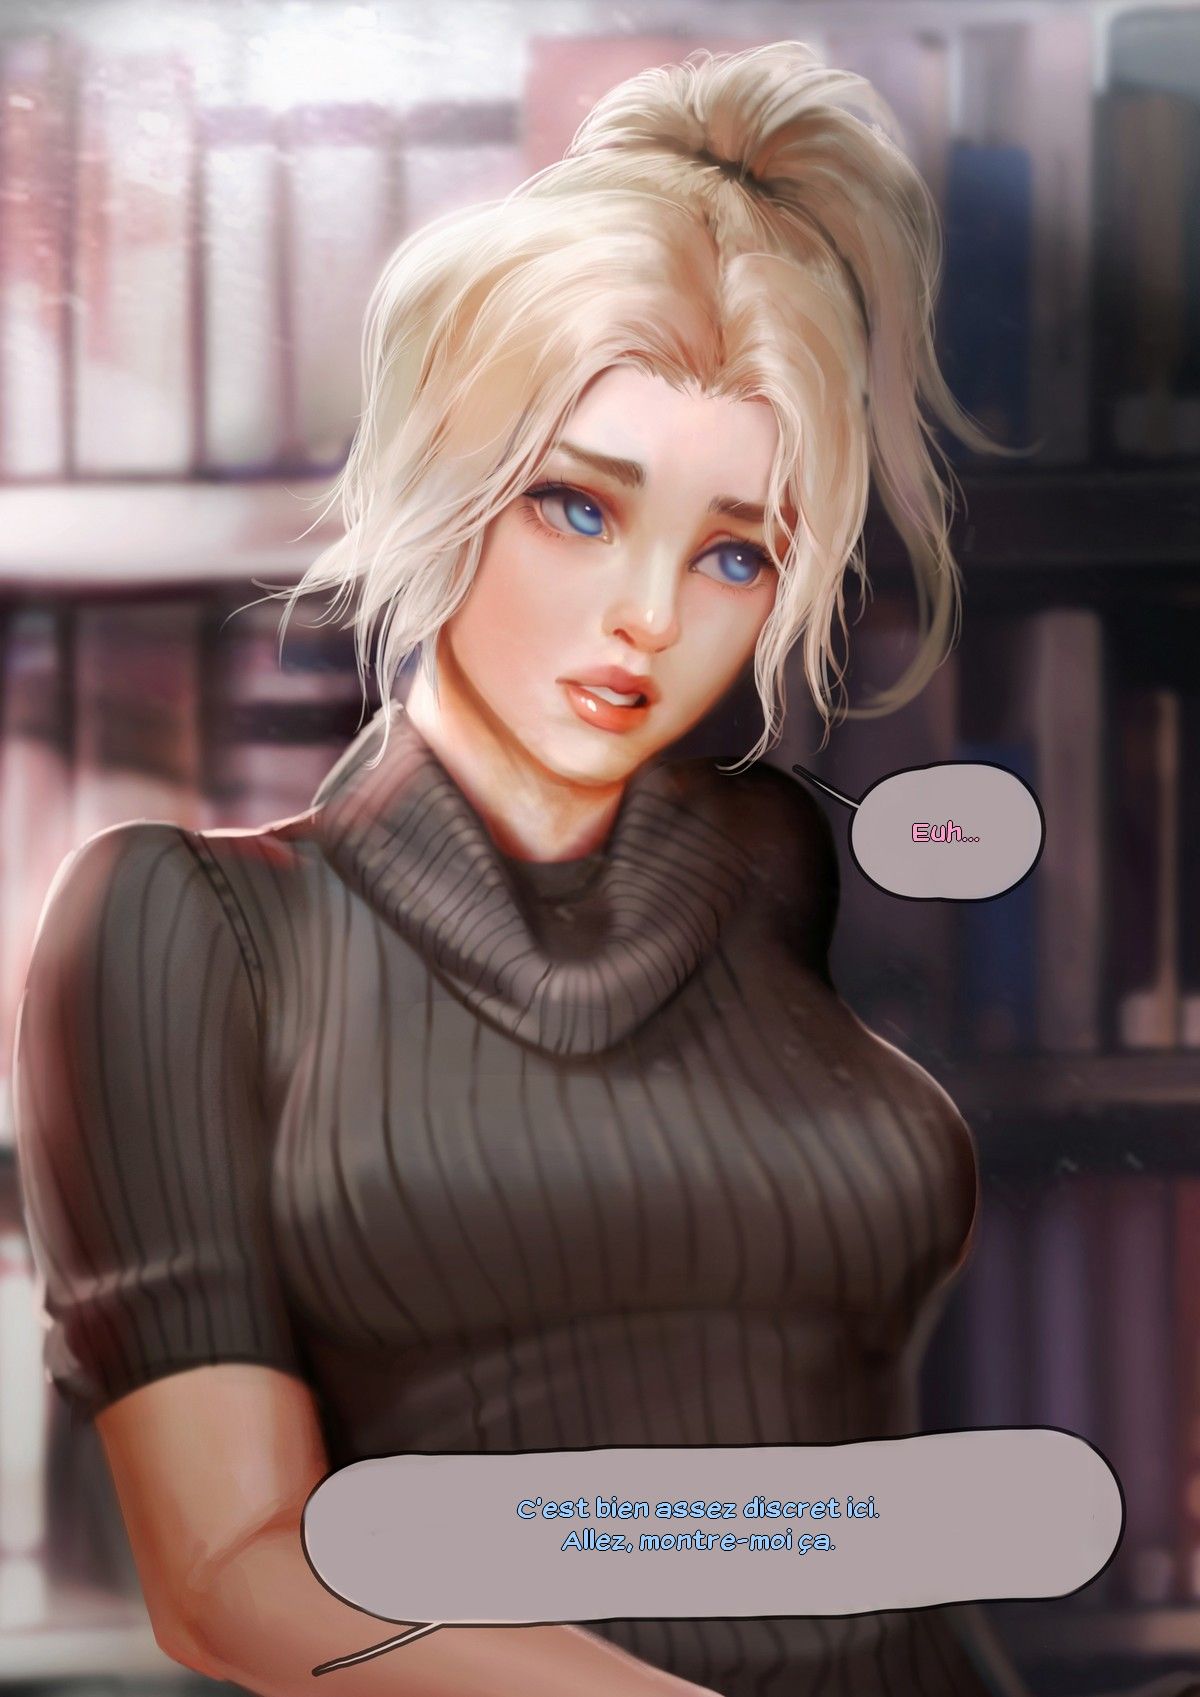 [Firolian] Mercy's second audition [French][Zer0] 15